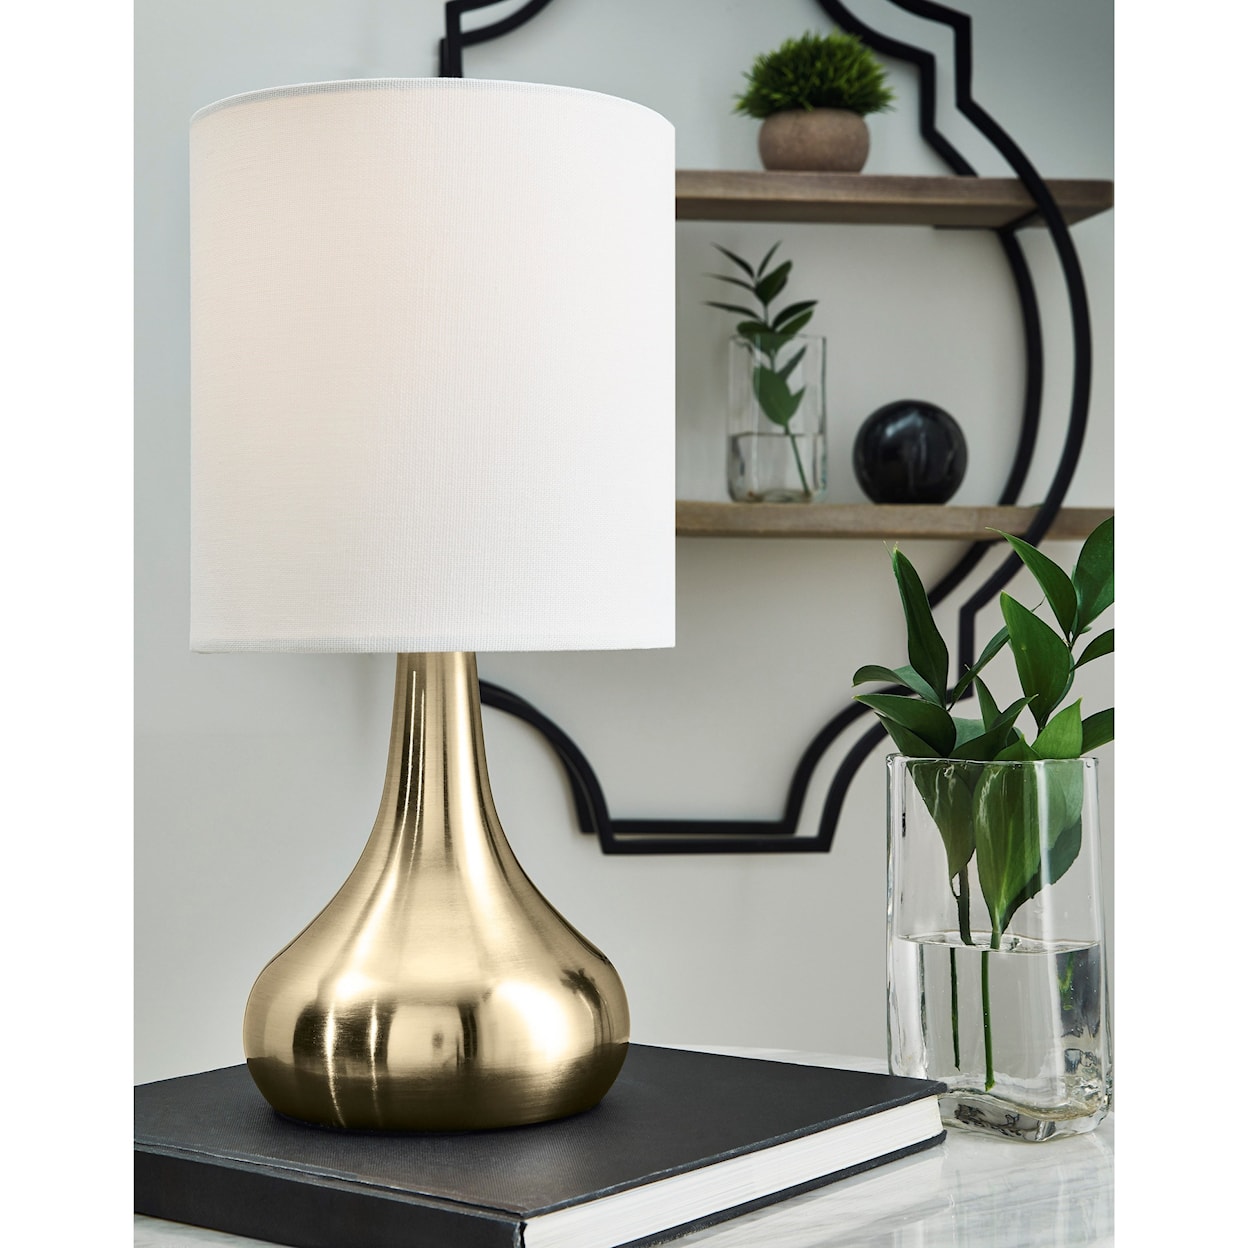 Ashley Furniture Signature Design Lamps - Contemporary Camdale Brass Finish Metal Table Lamp